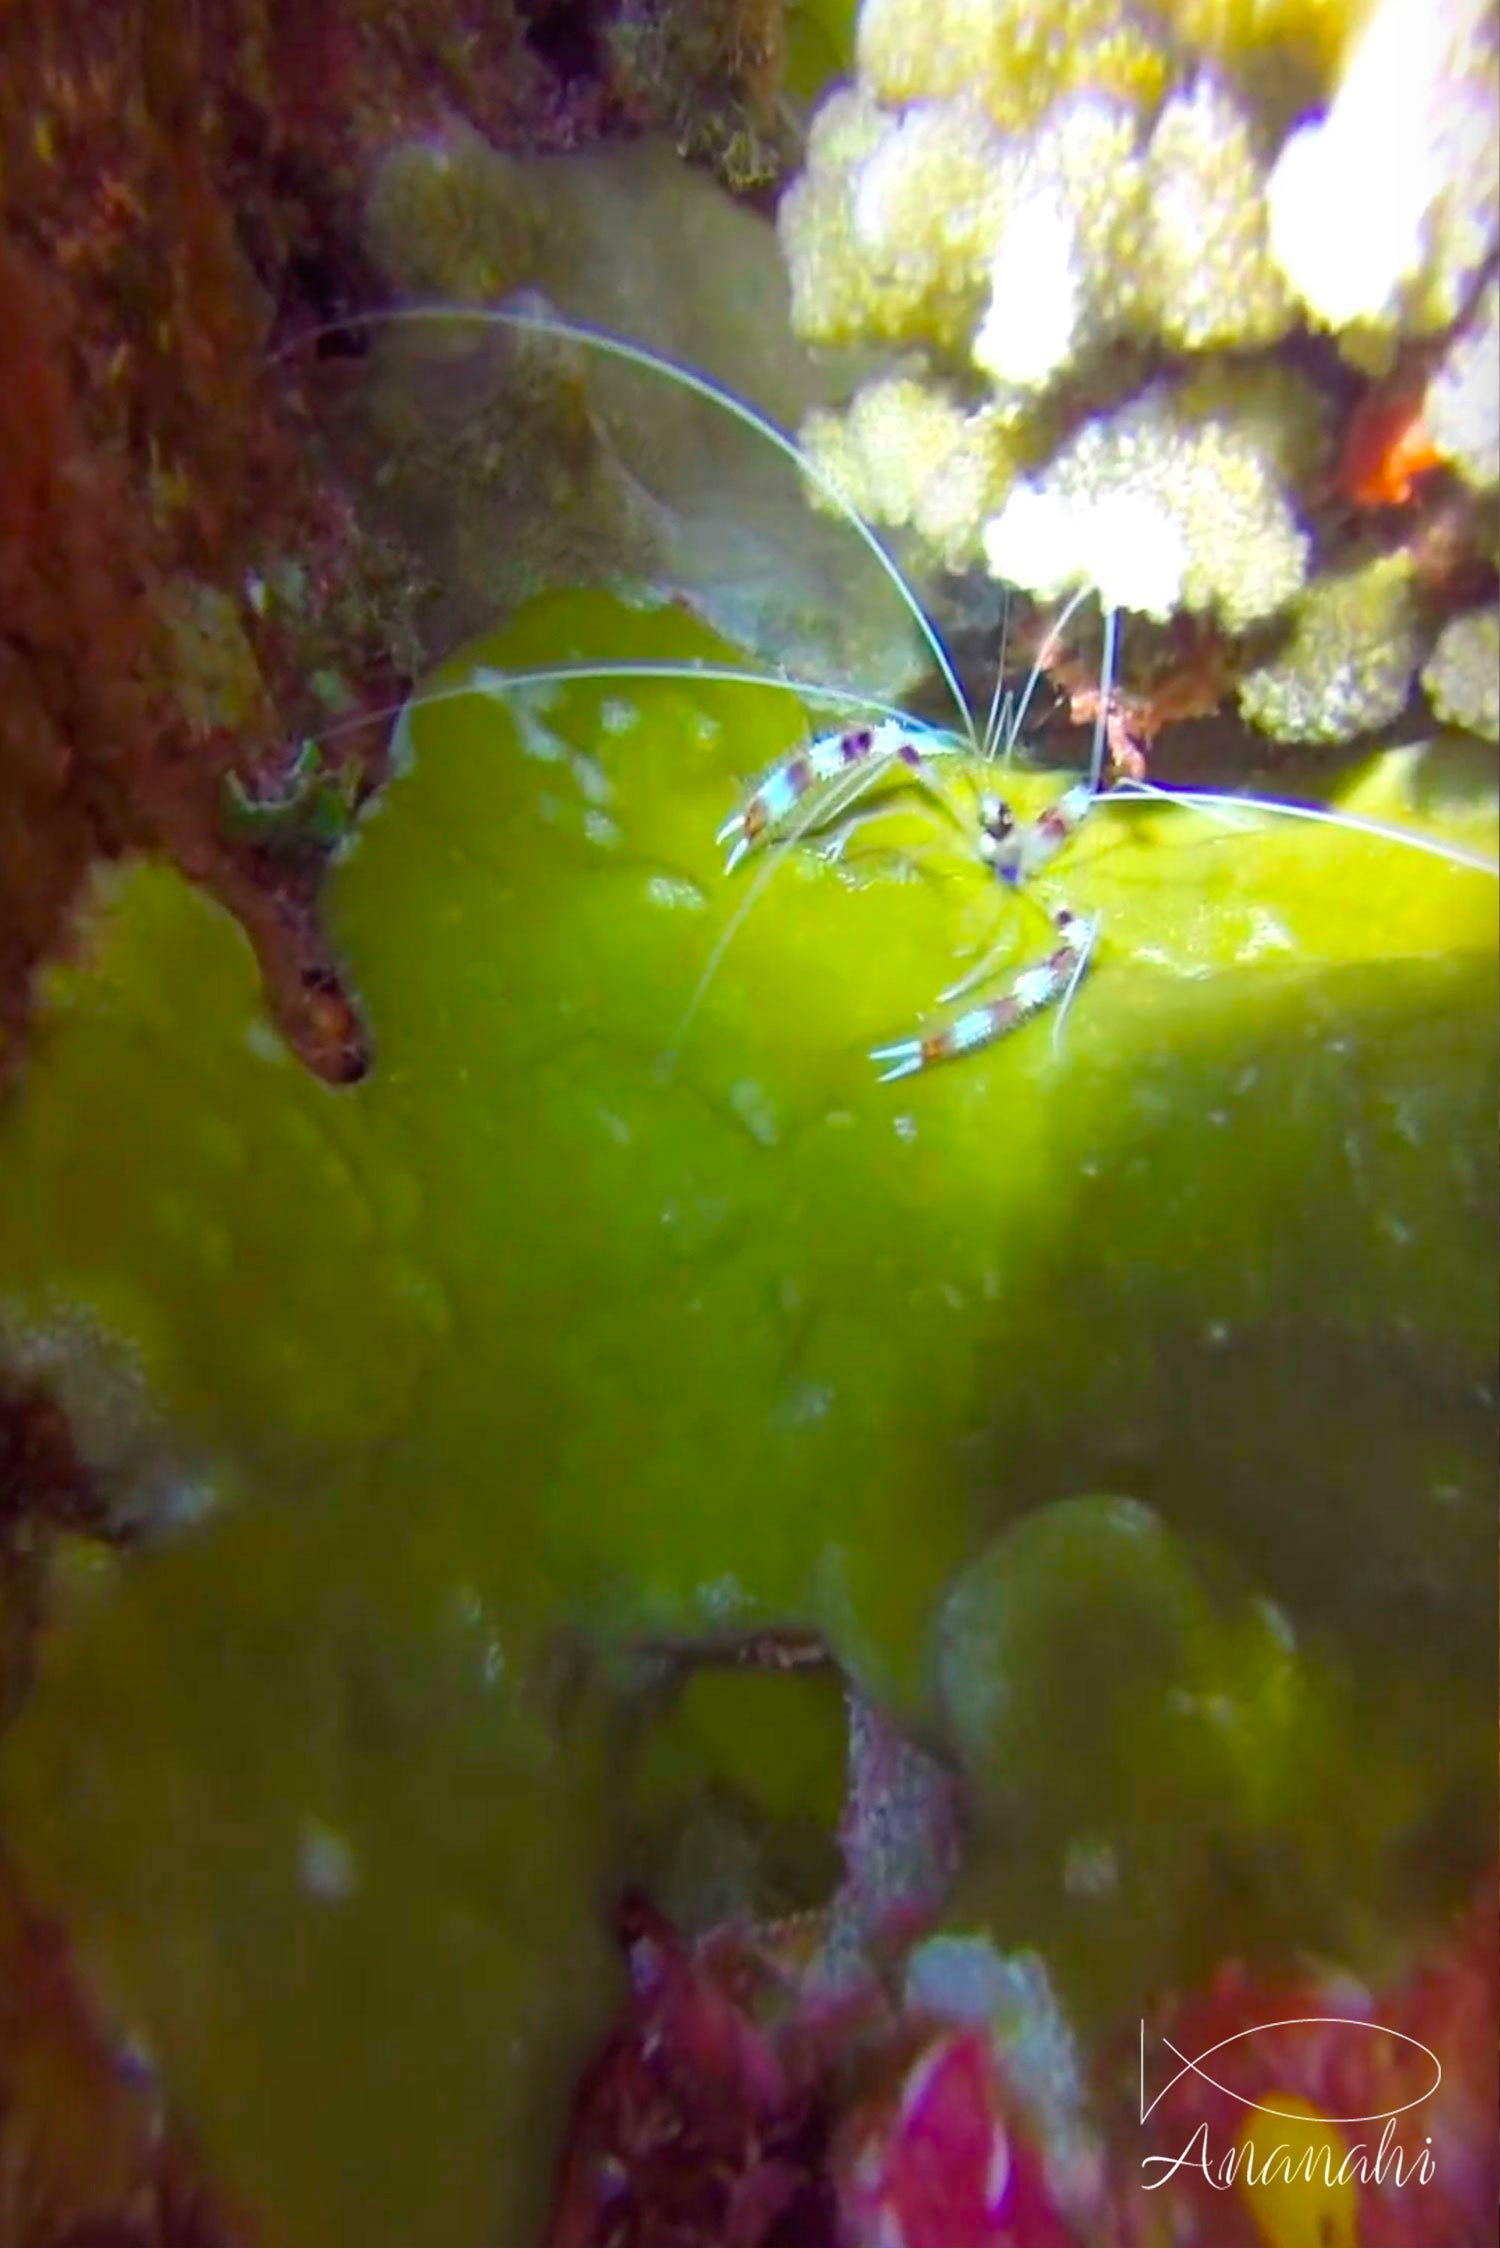 Banded cleaner shrimp of French polynesia